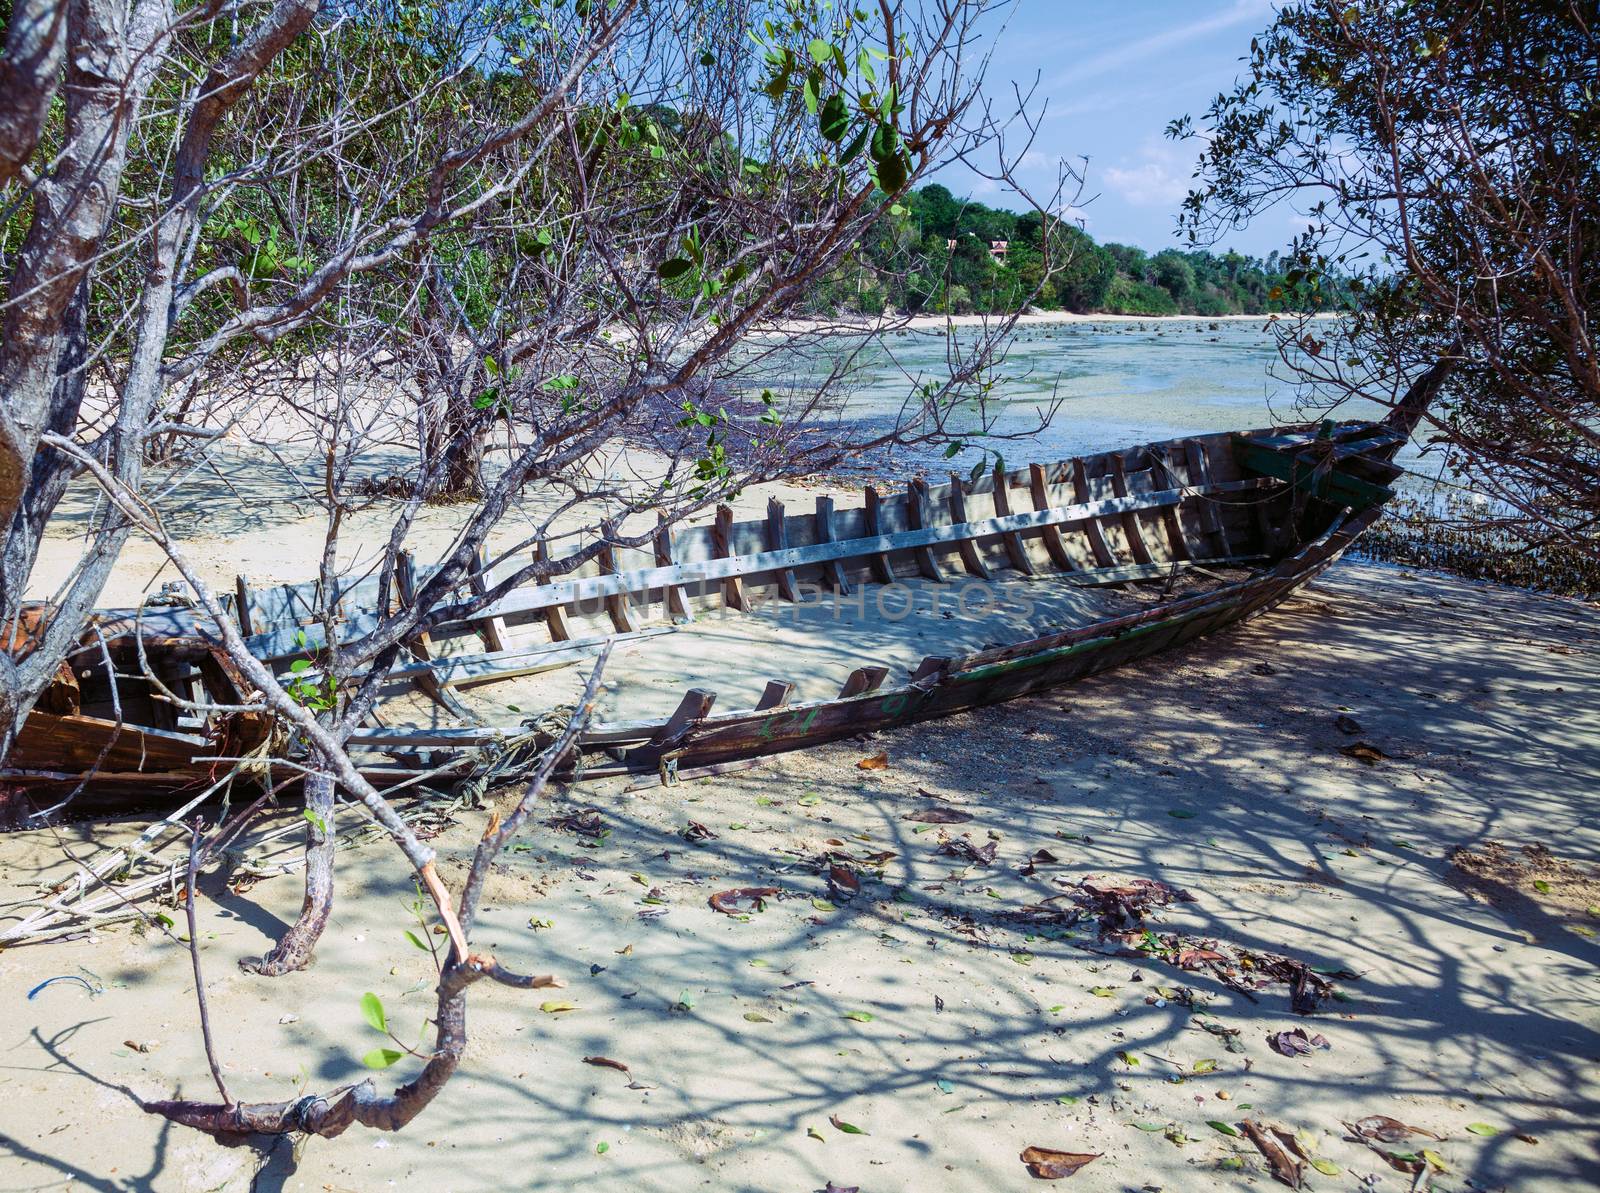 skeleton boat thrown into the bushes on the coast